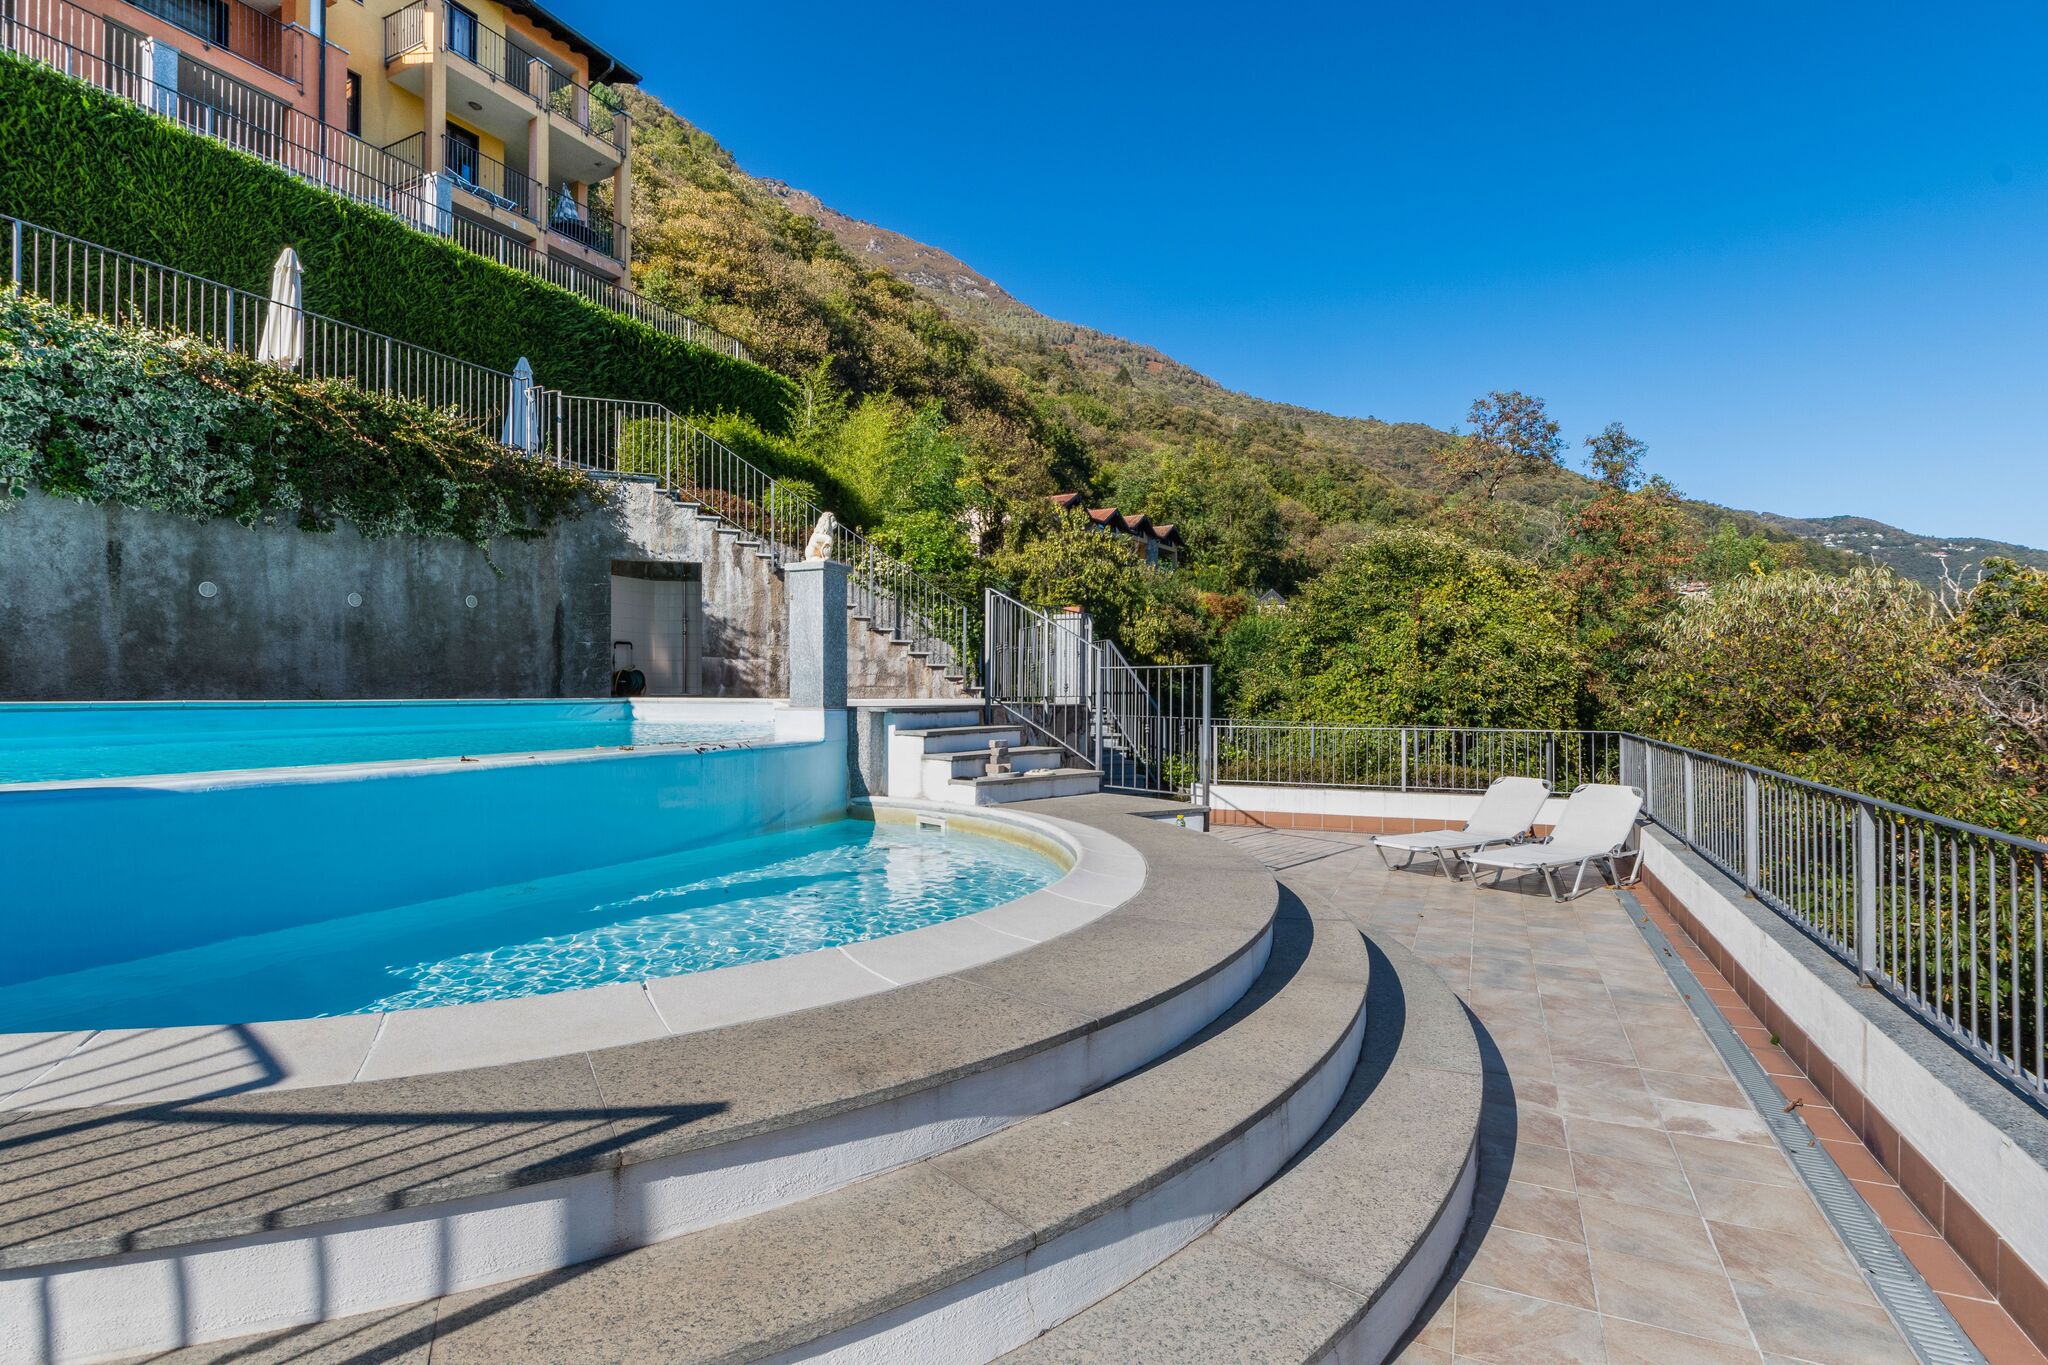 Residential complex with panoramic views and pool